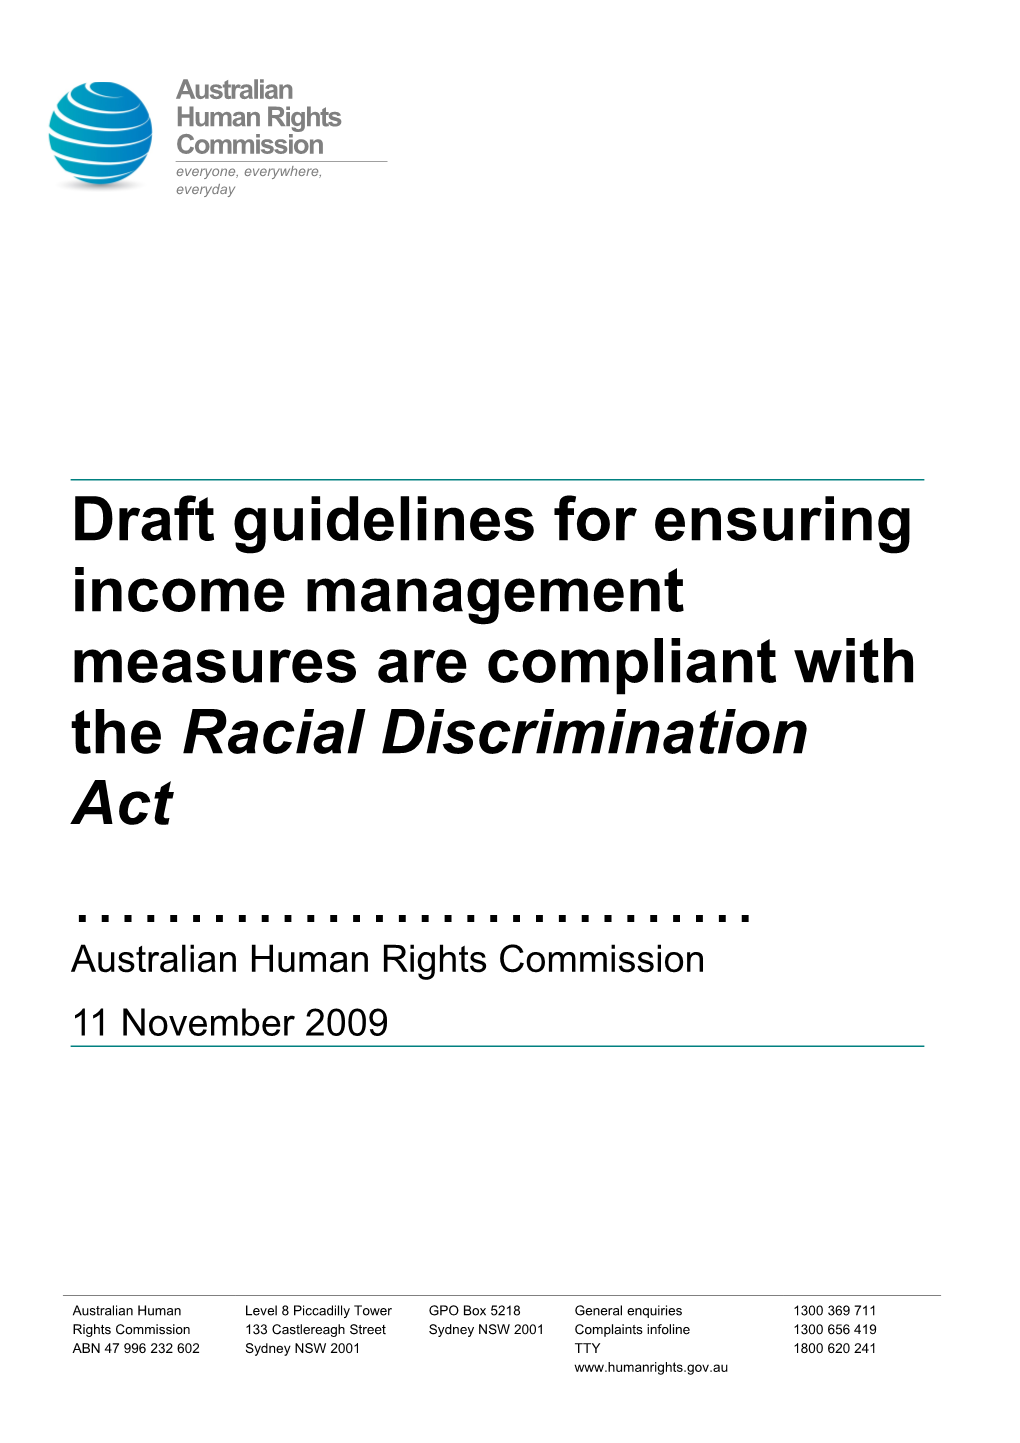 Draft RDA Guidelines for Income Management Measures (2009)